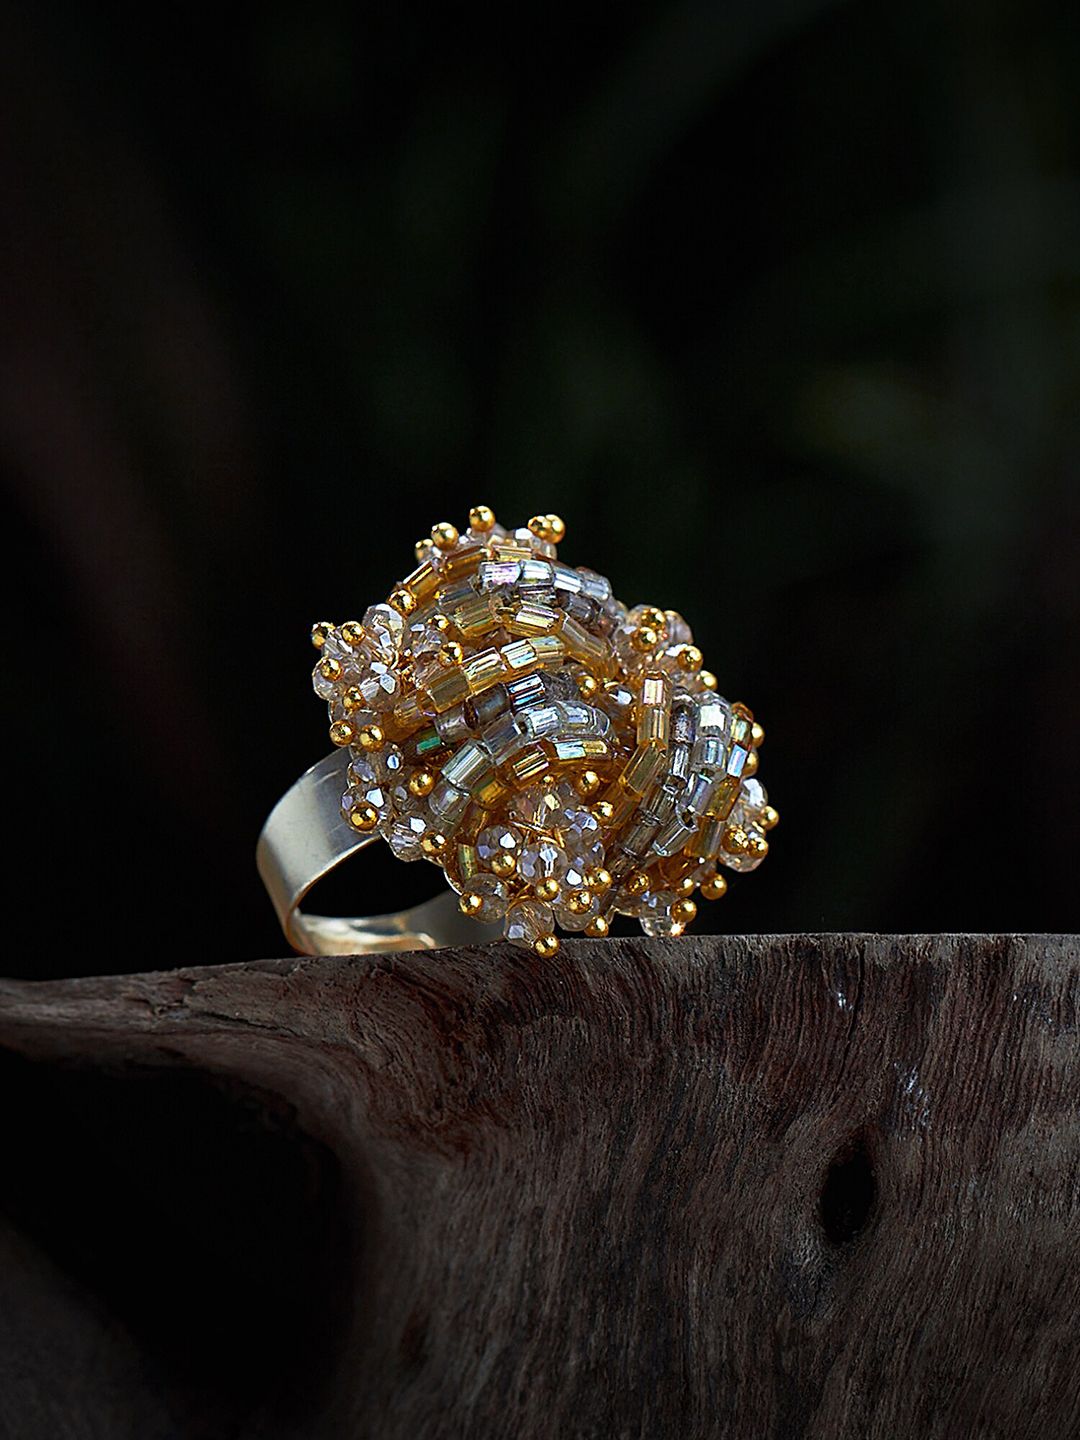 D'oro Gold-Plated Adjustable Finer Ring Embellished With Crystals & Glass Beads Price in India